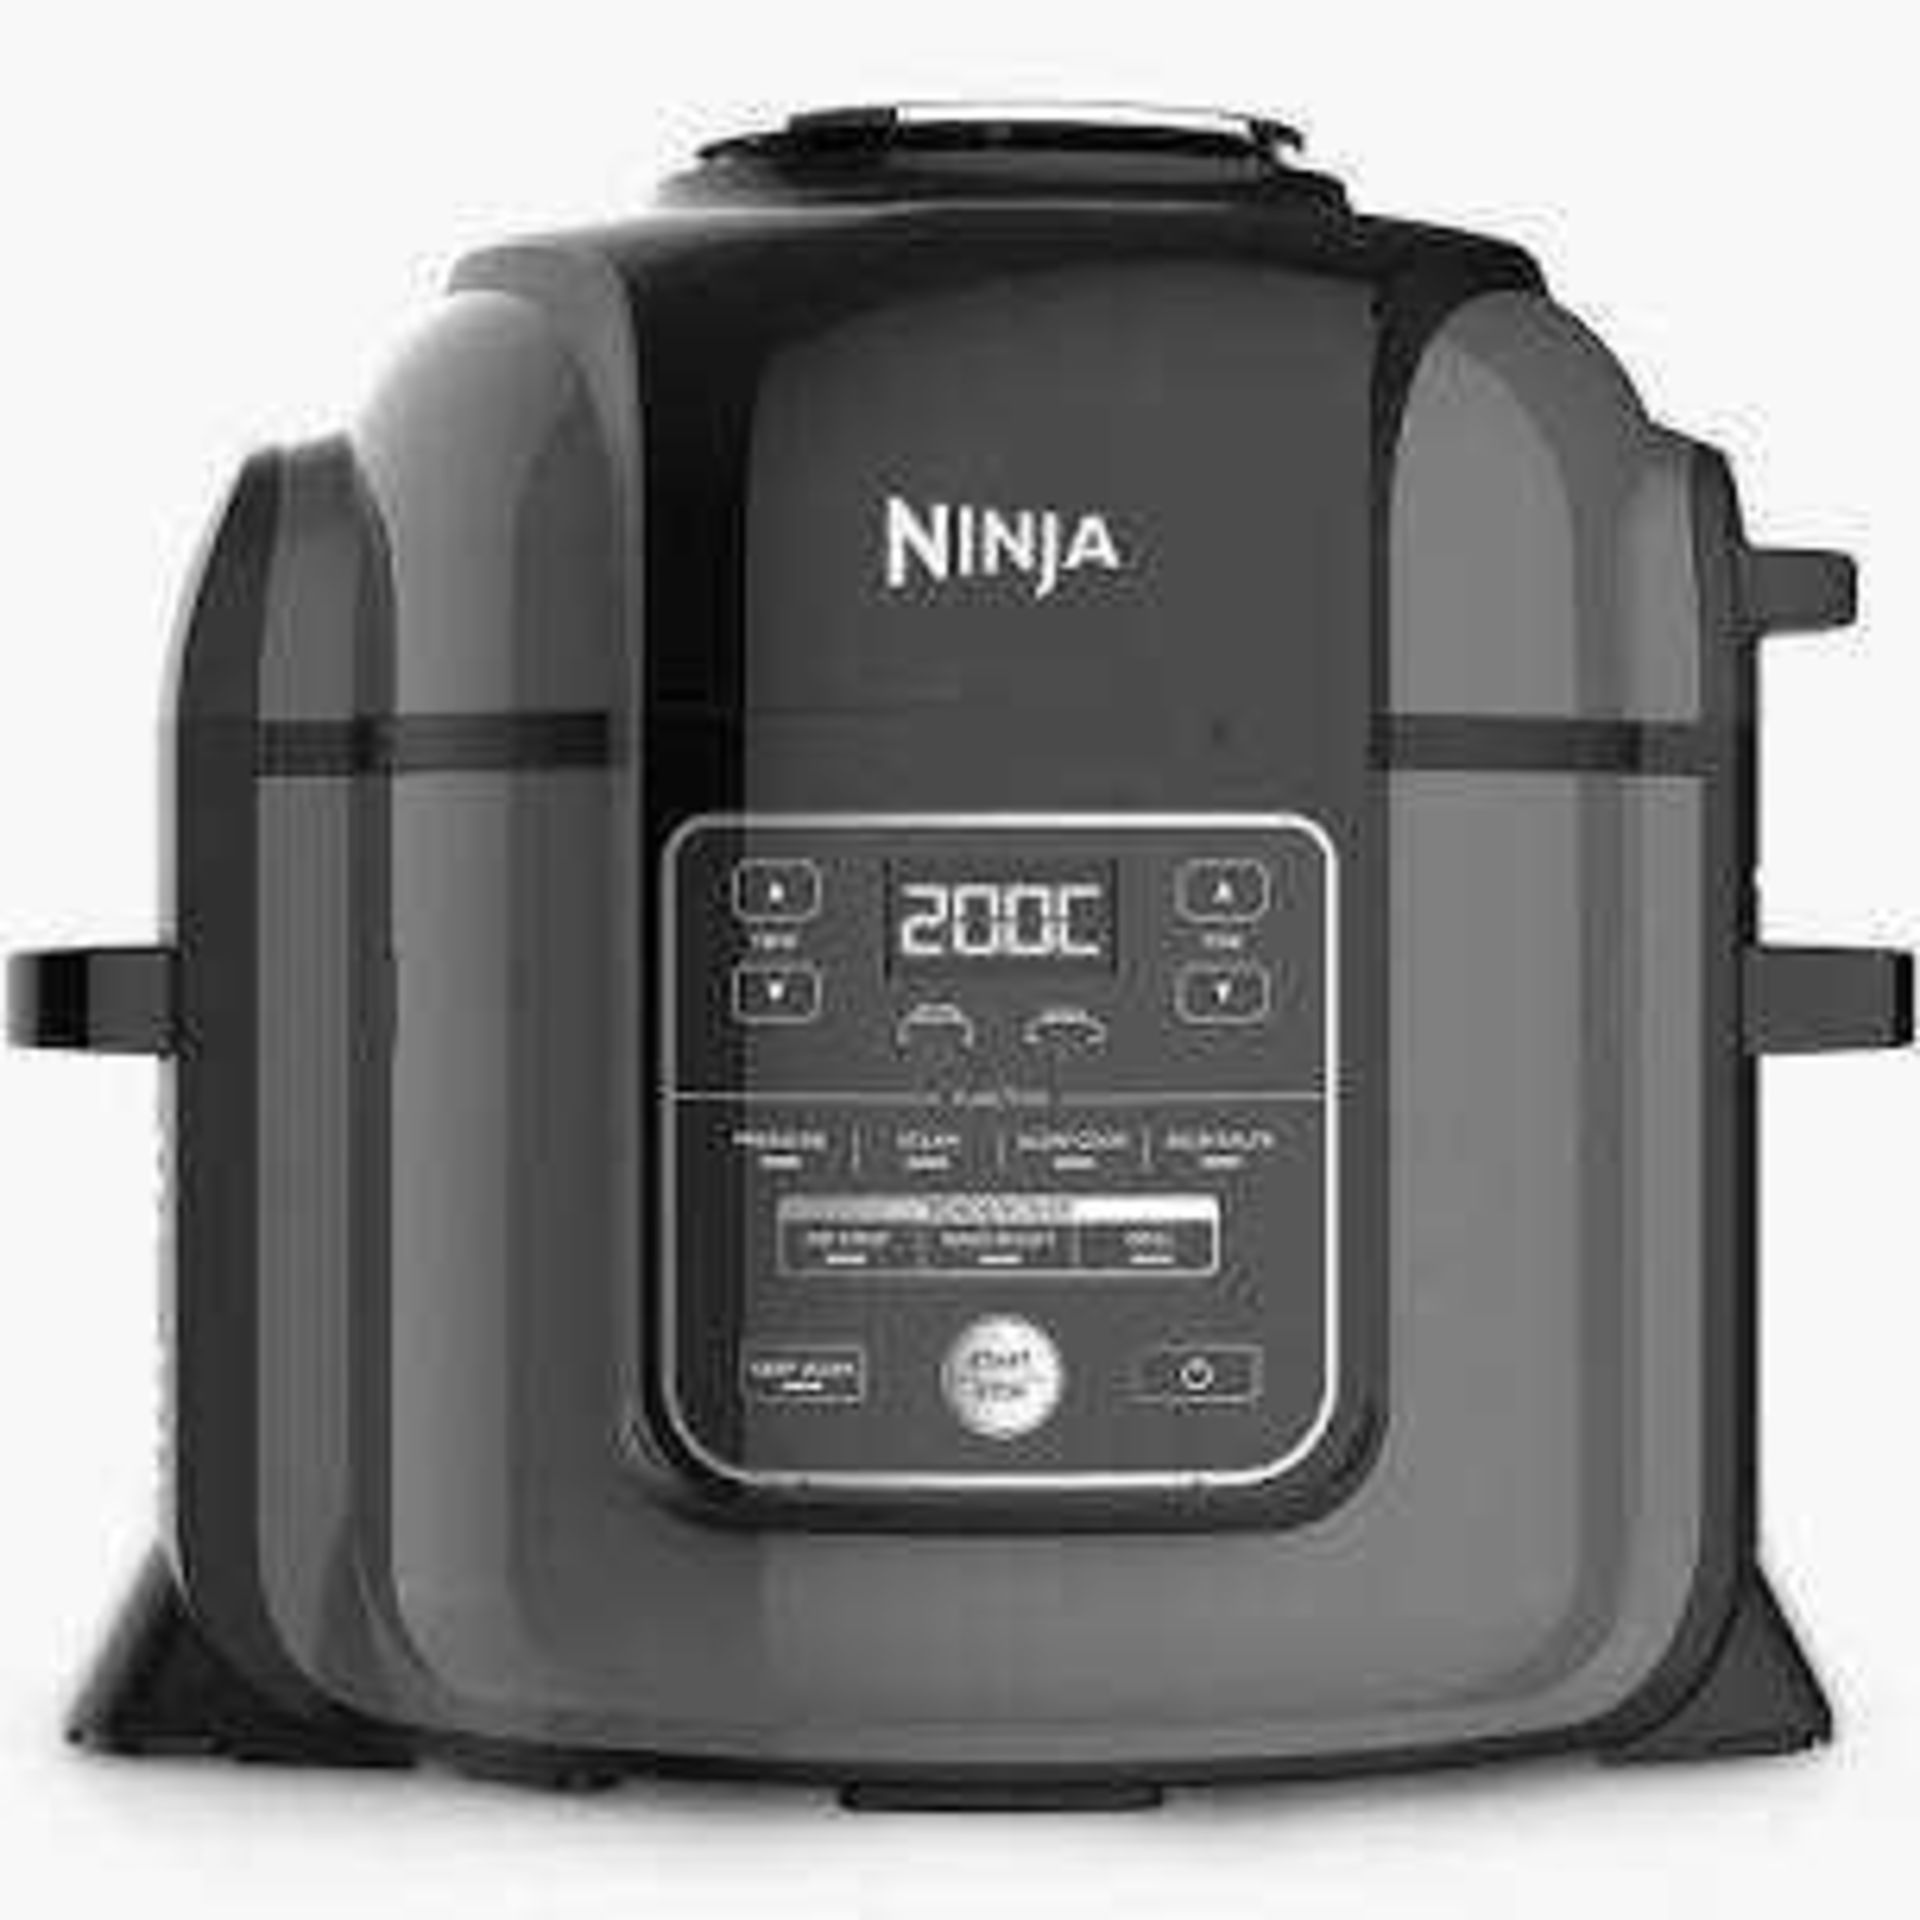 RRP £250 Boxed Ninja Foodi Max 7.5Ltr Multi Cooker (Appraisal Available On Request) (Pictures For